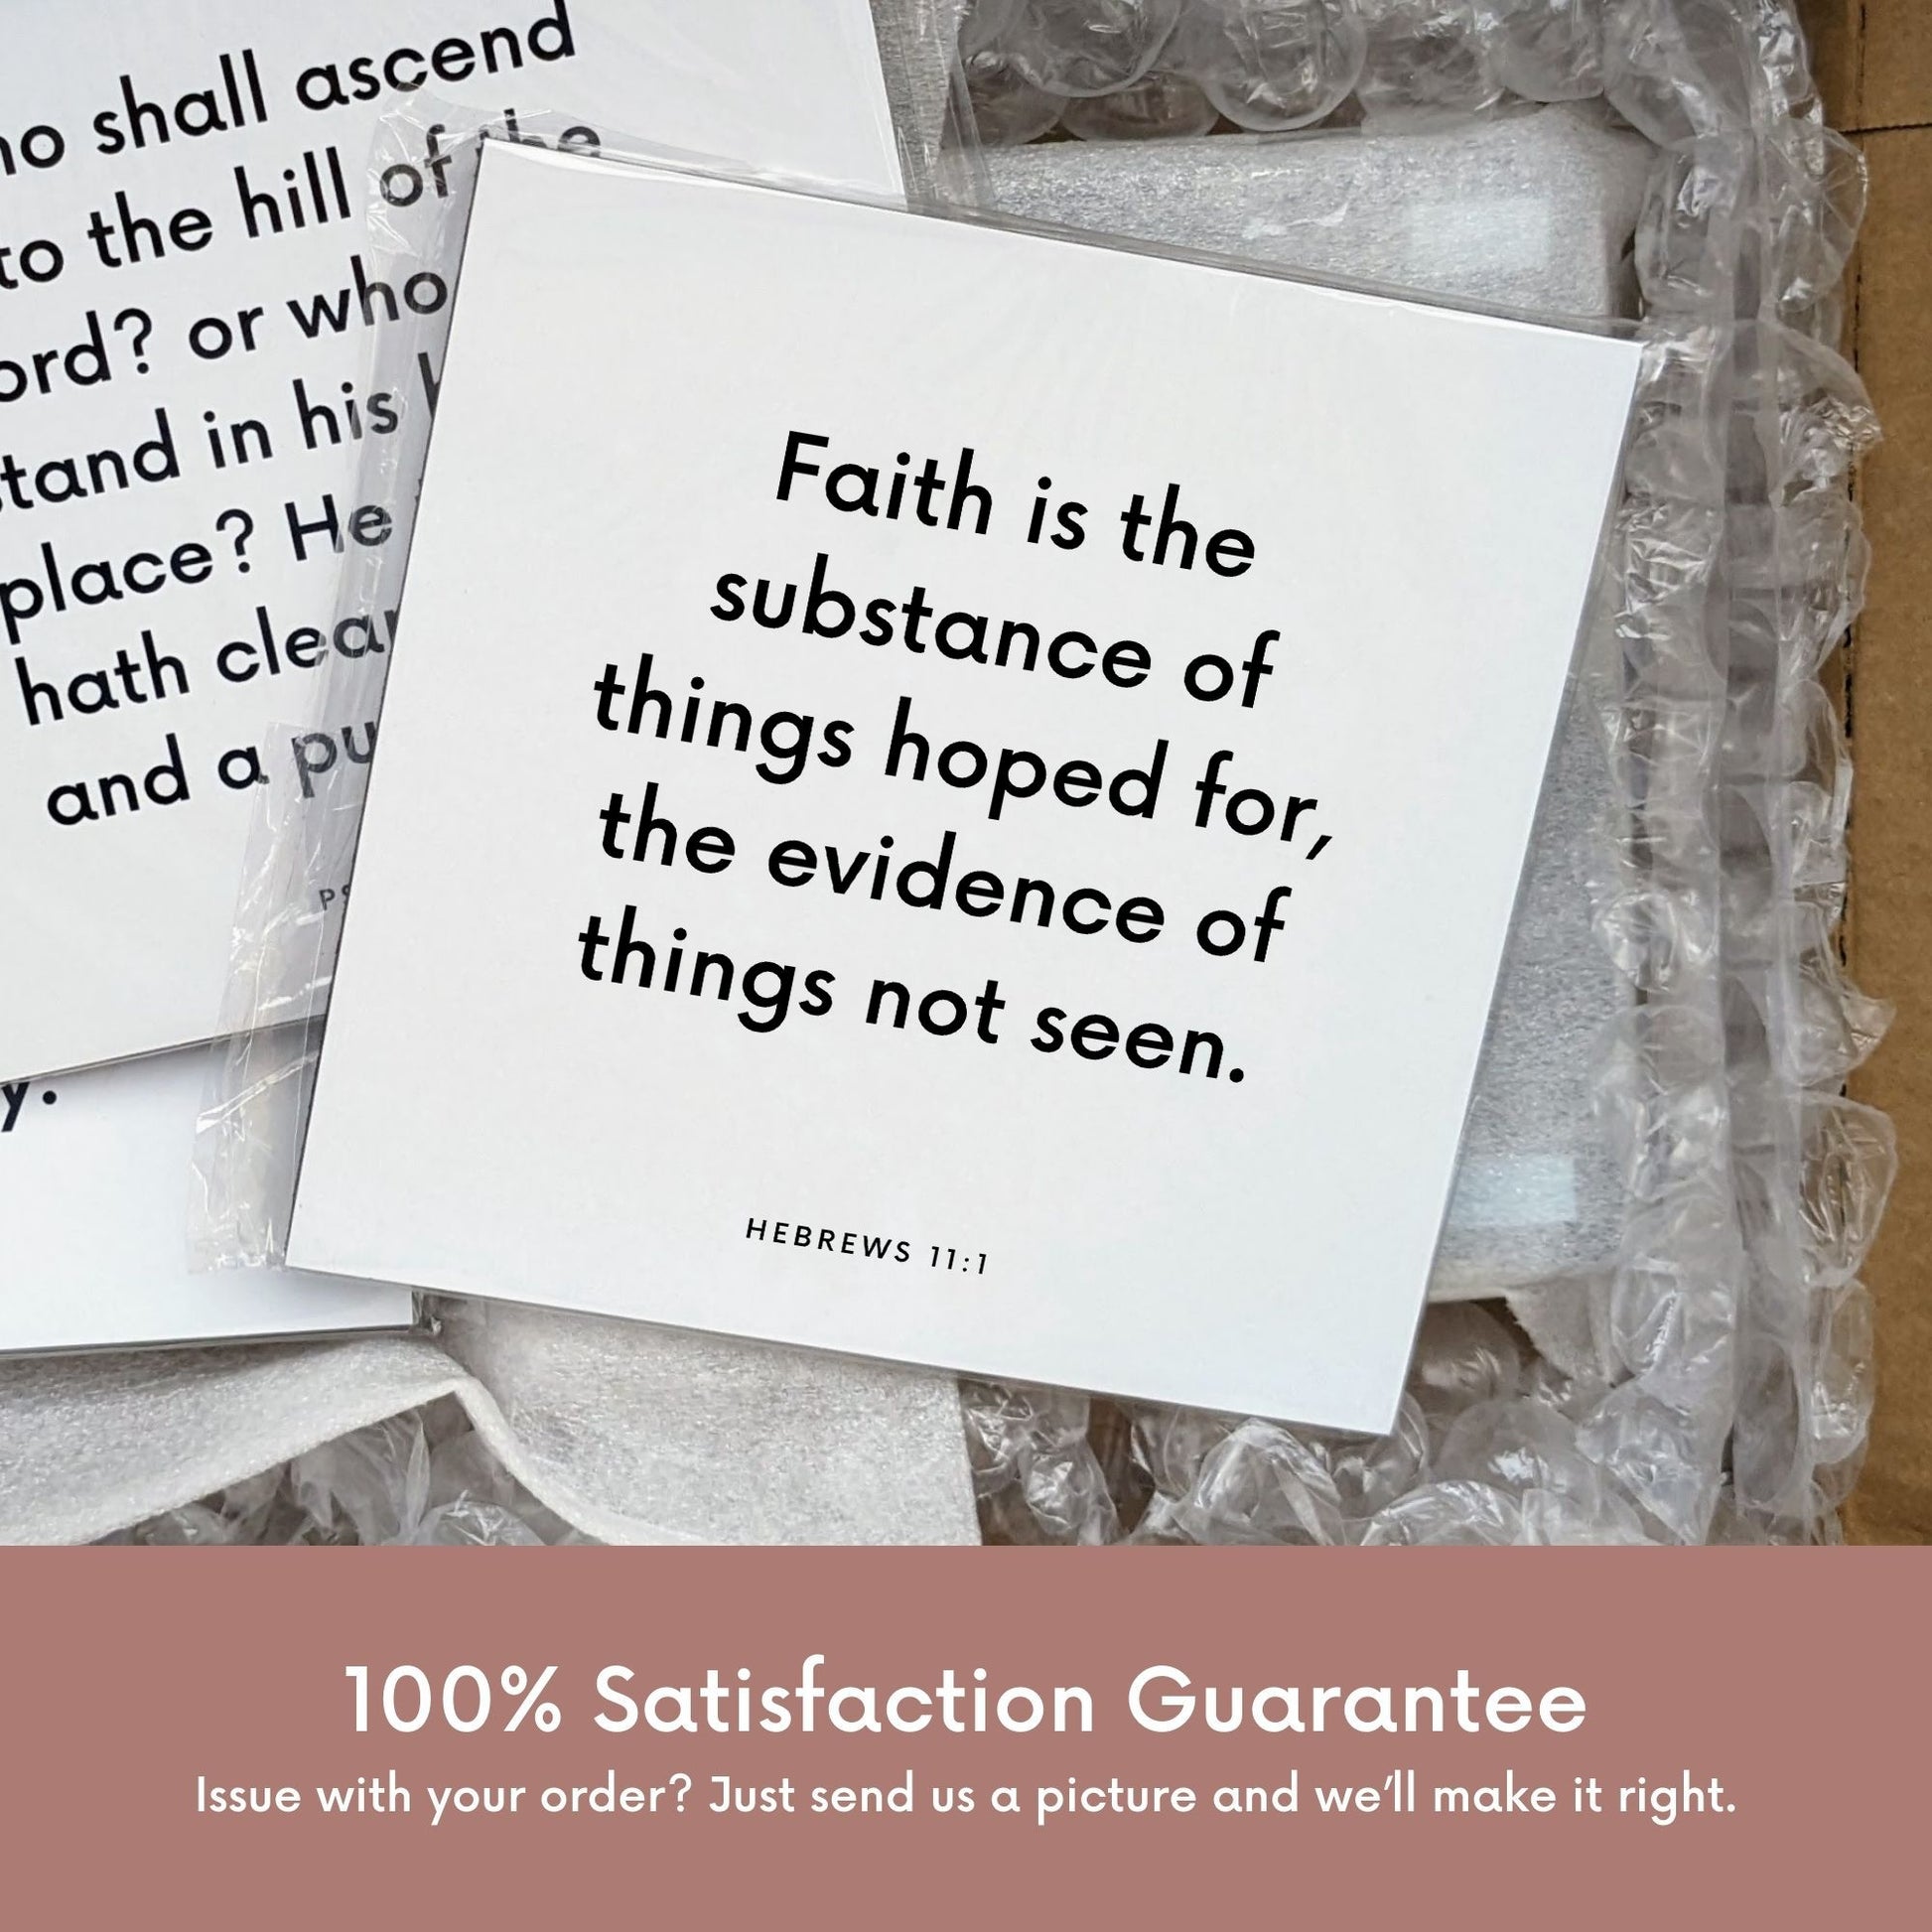 Shipping materials for scripture tile of Hebrews 11:1 - "Faith is the substance of things hoped for"